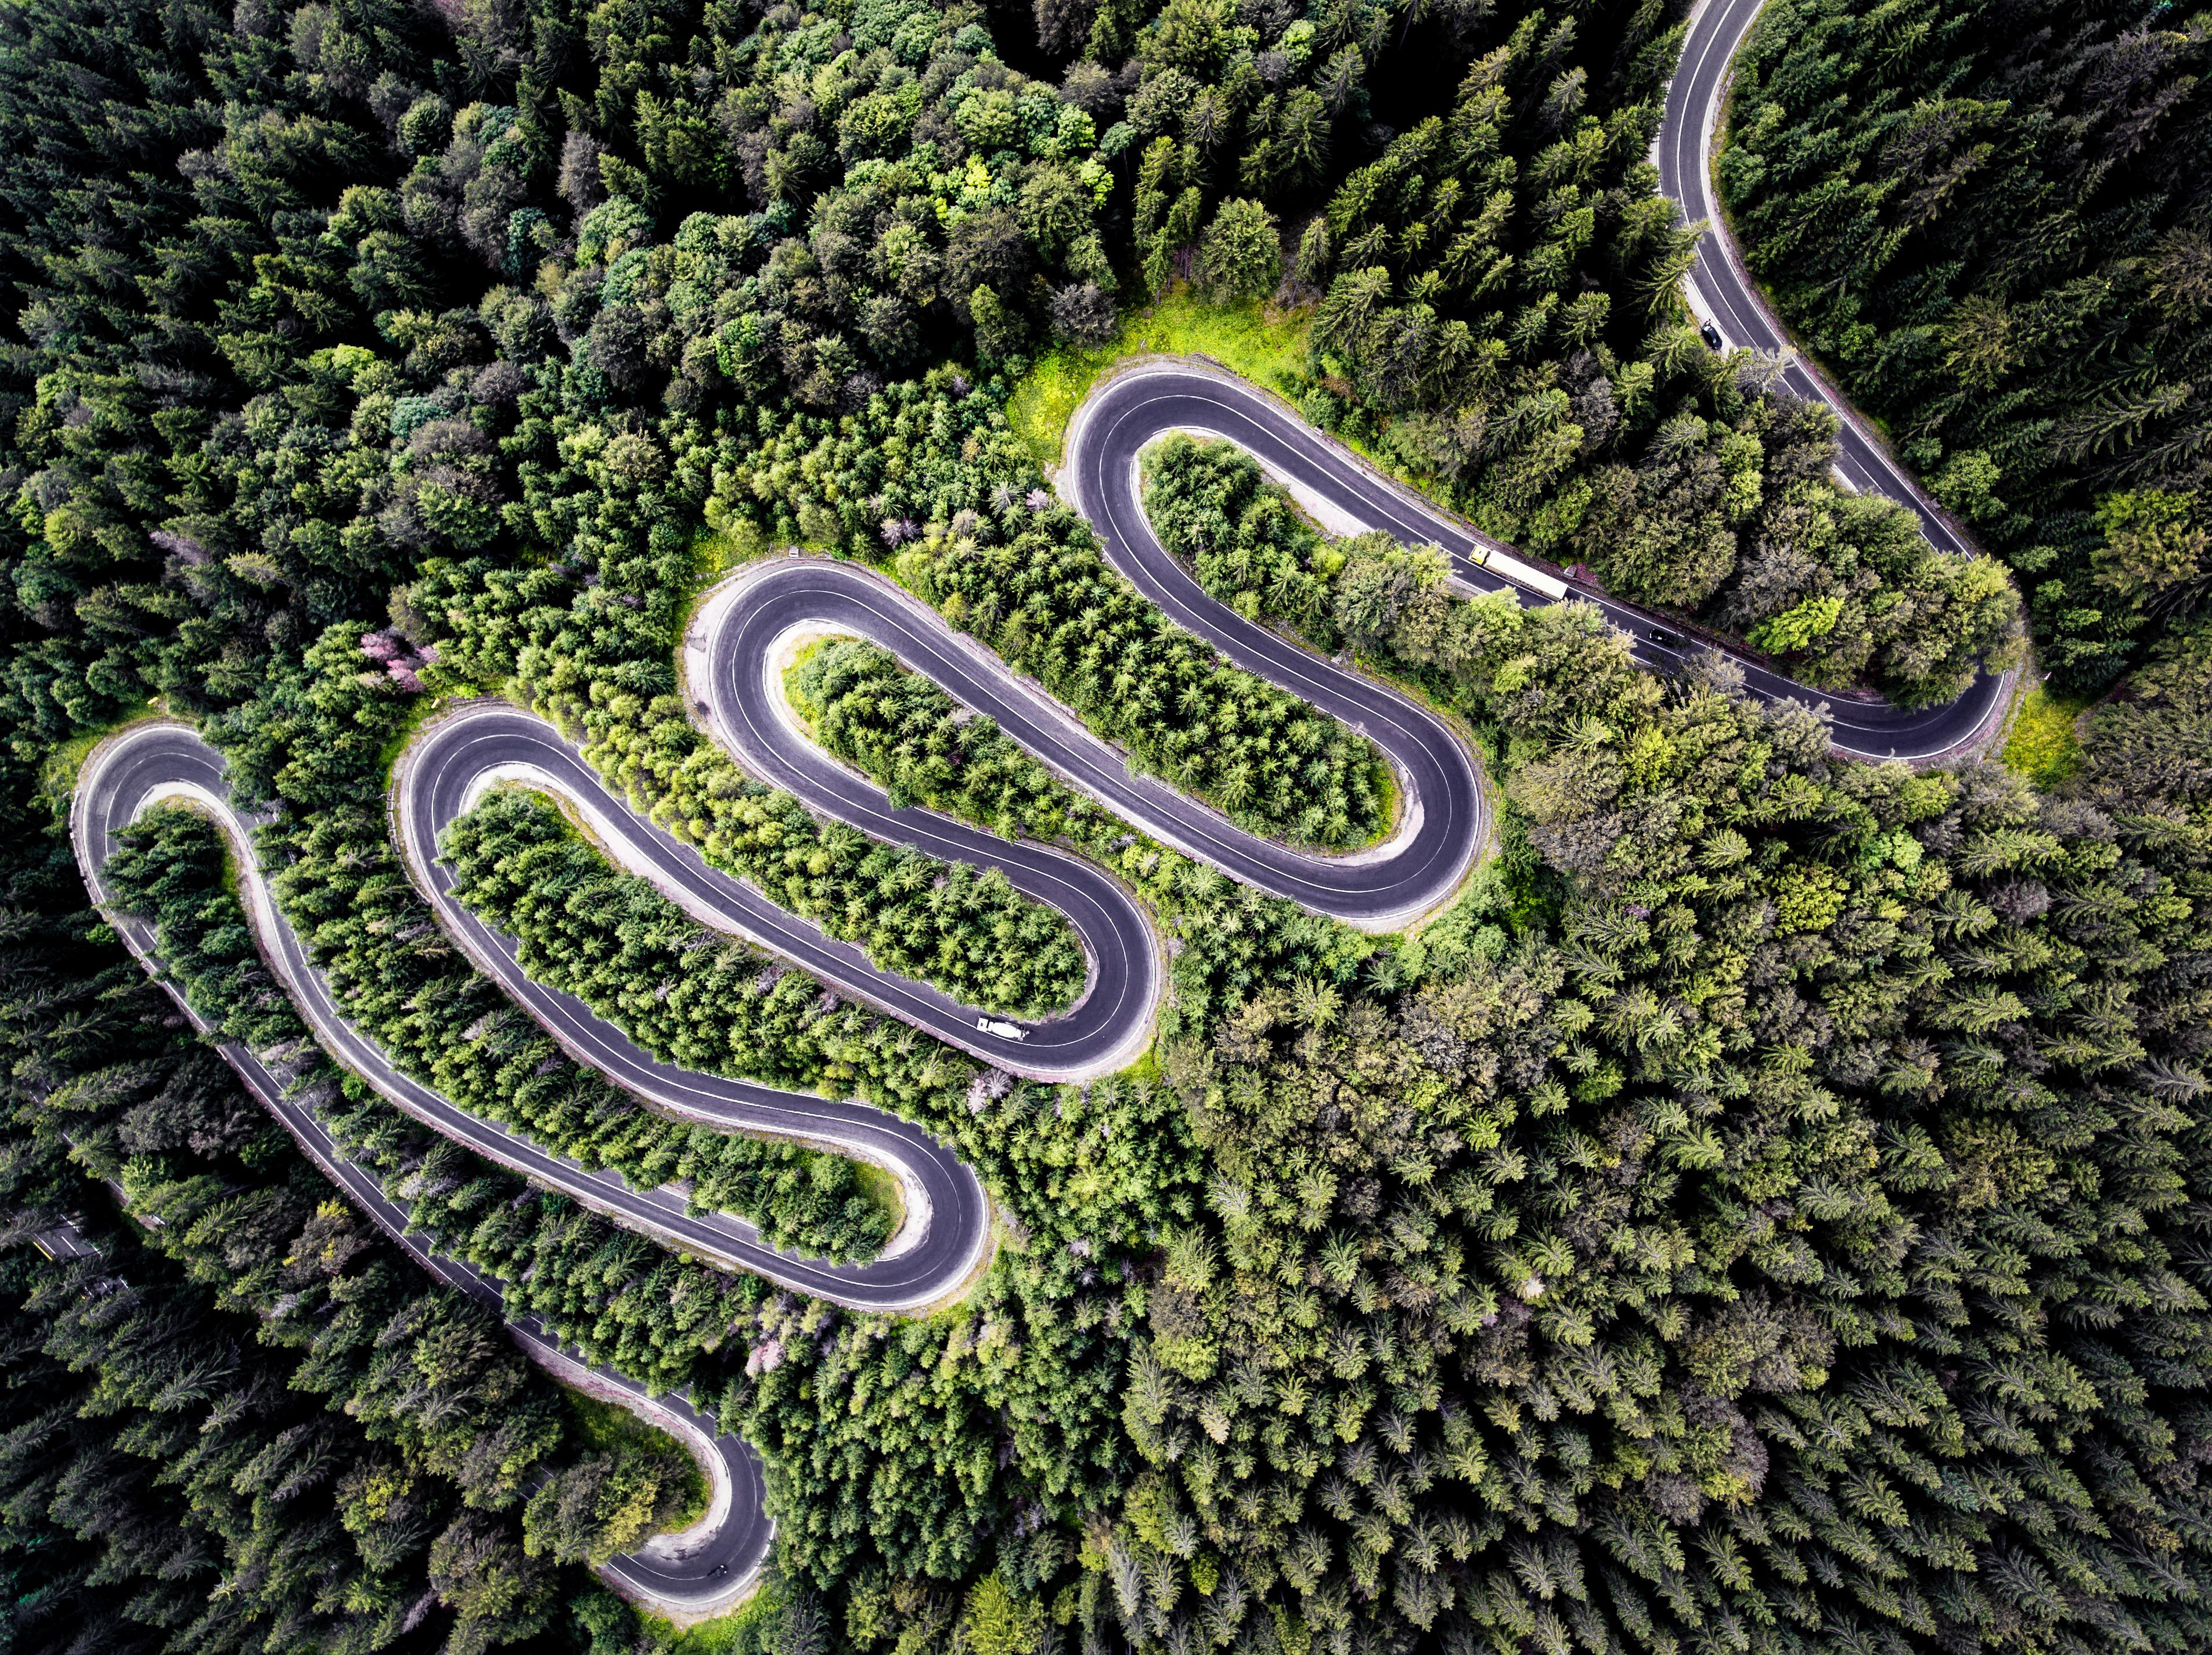 Best drone photo from Dronestagram's 2017 contest